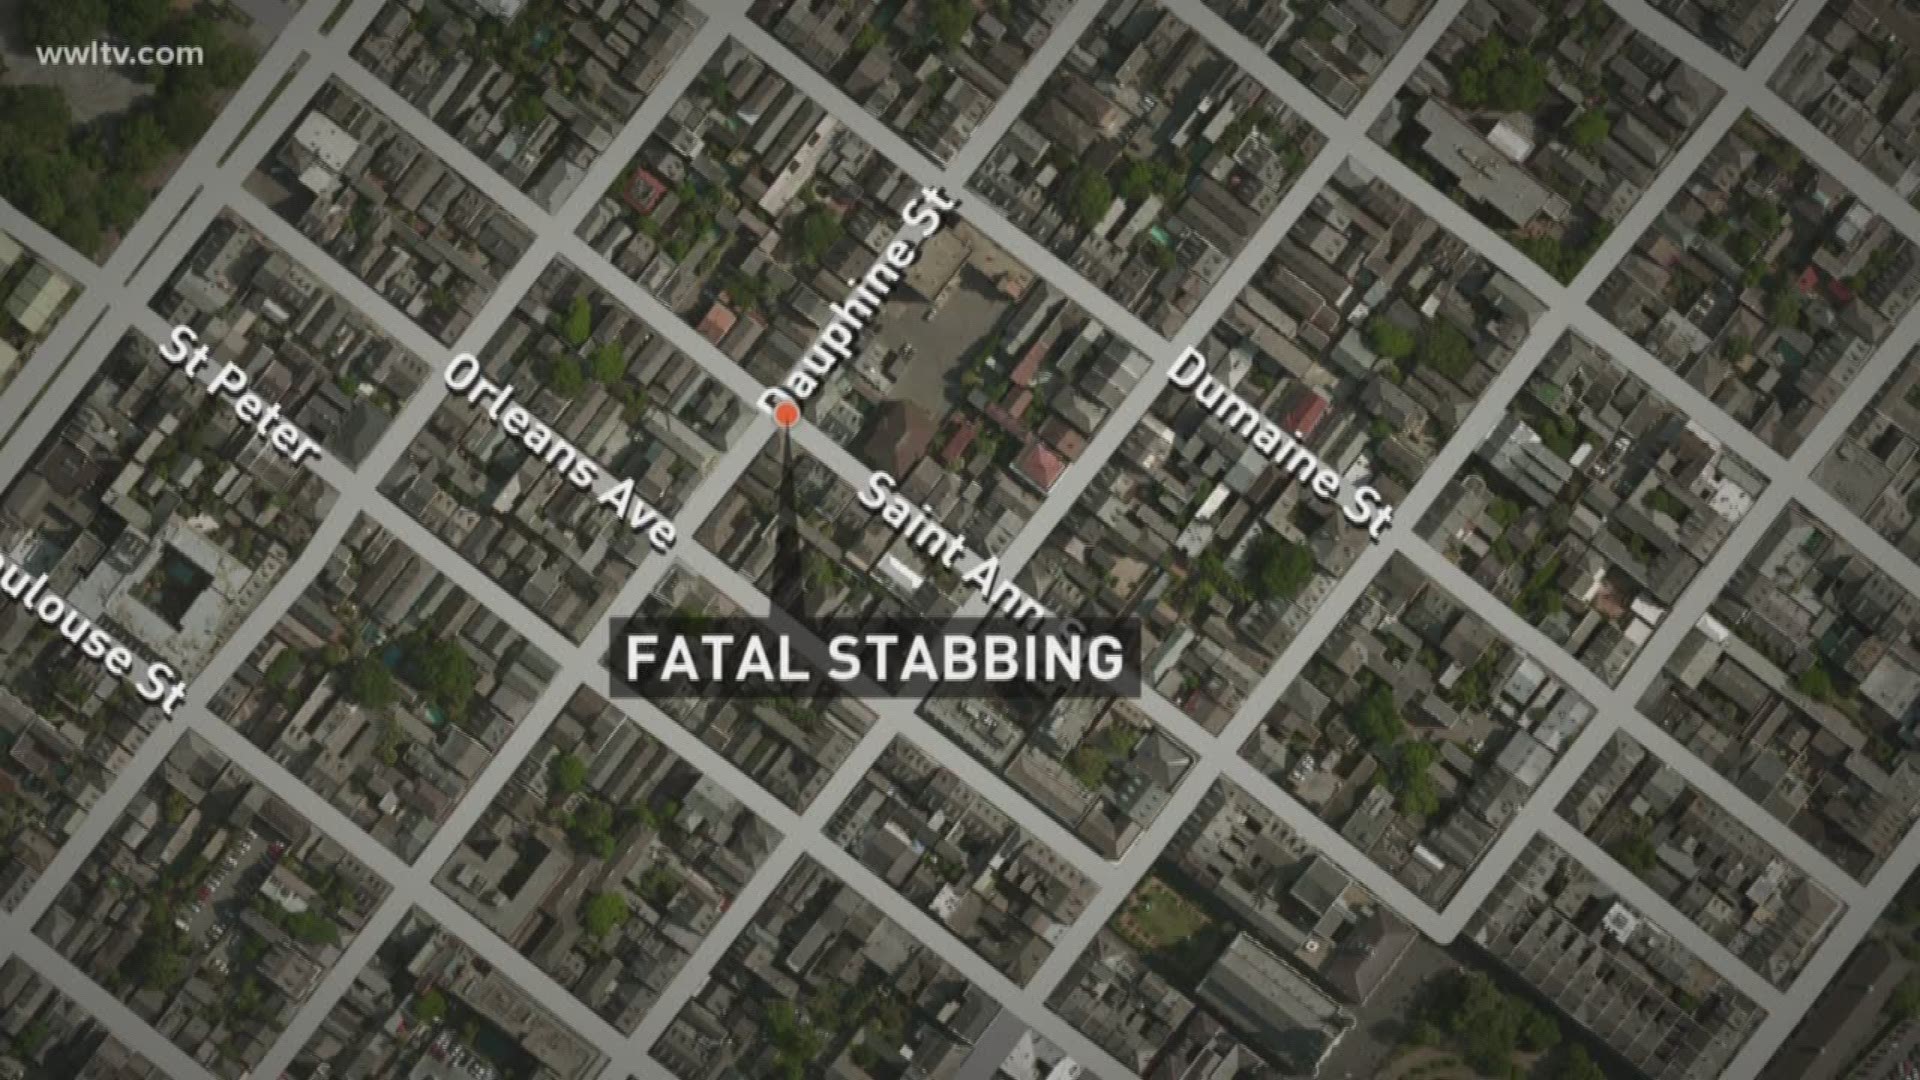 One man has been arrested in connection to the killing of a homeless man in the French Quarter early Saturday morning.